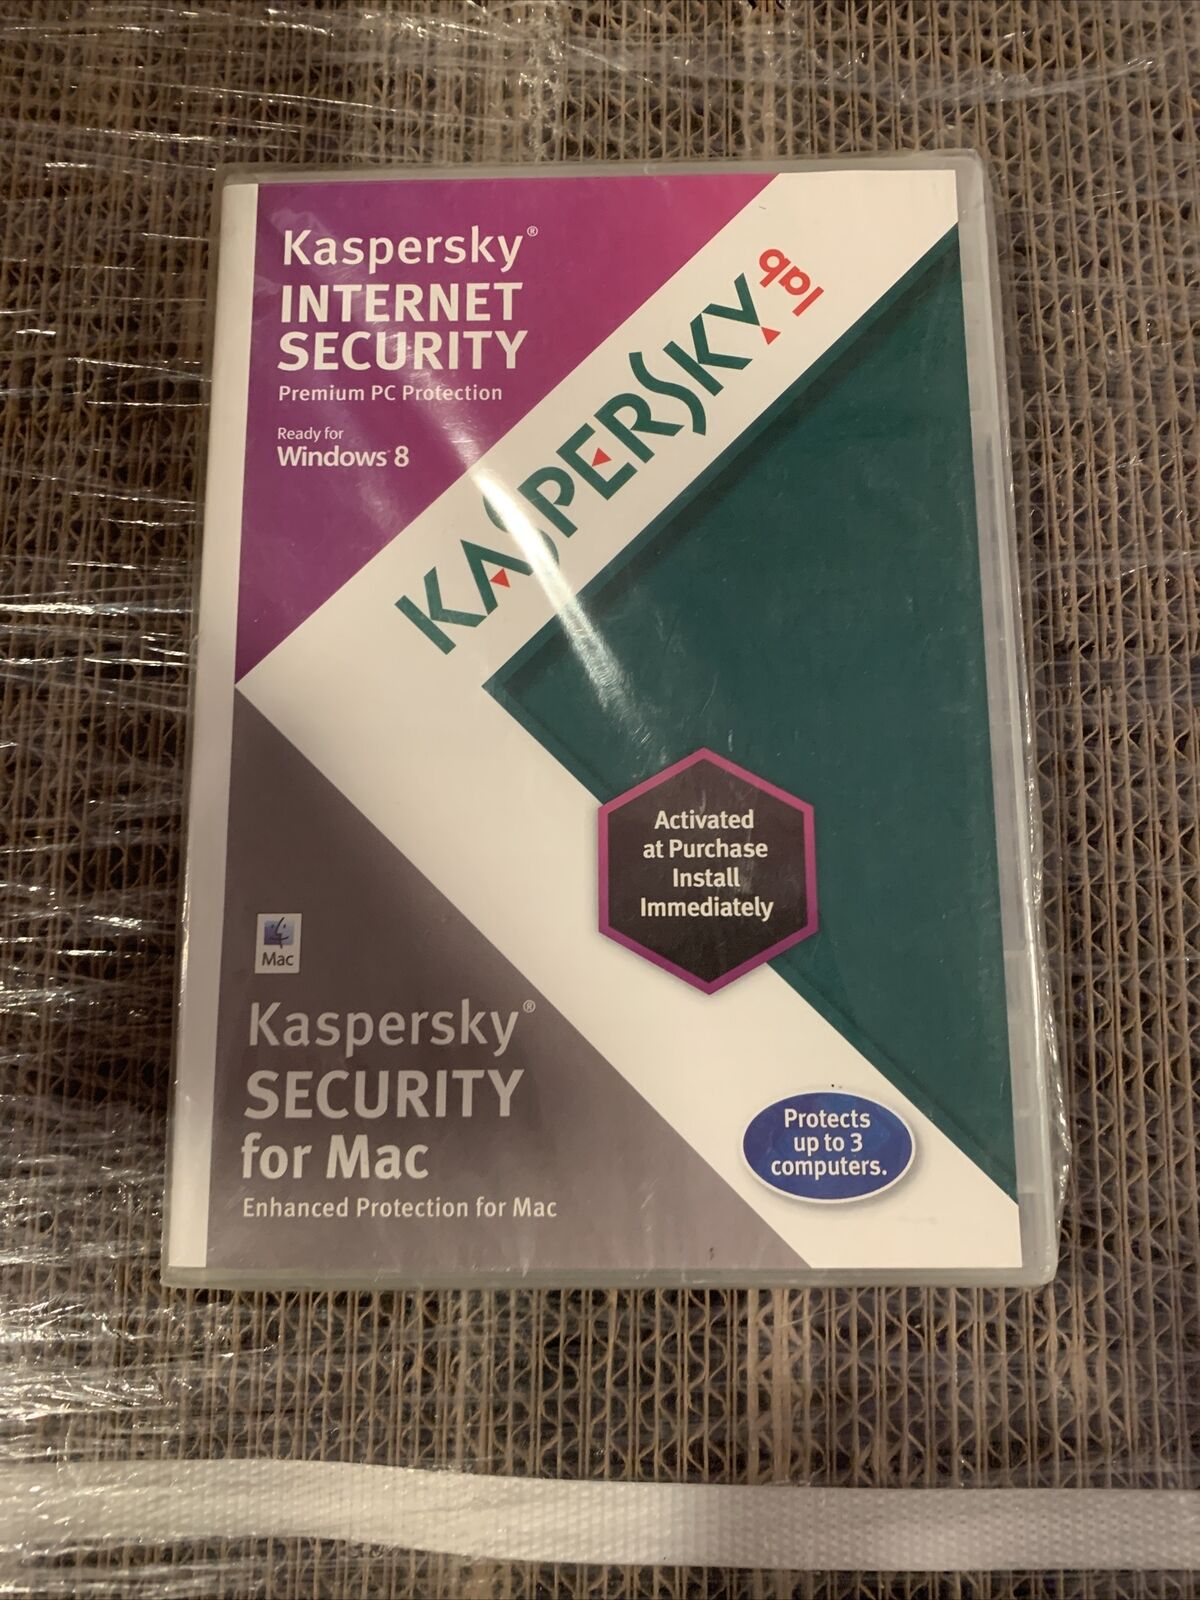 Kaspersky Internet Security For Mac 3 Computers Protection 2013 New & Sealed